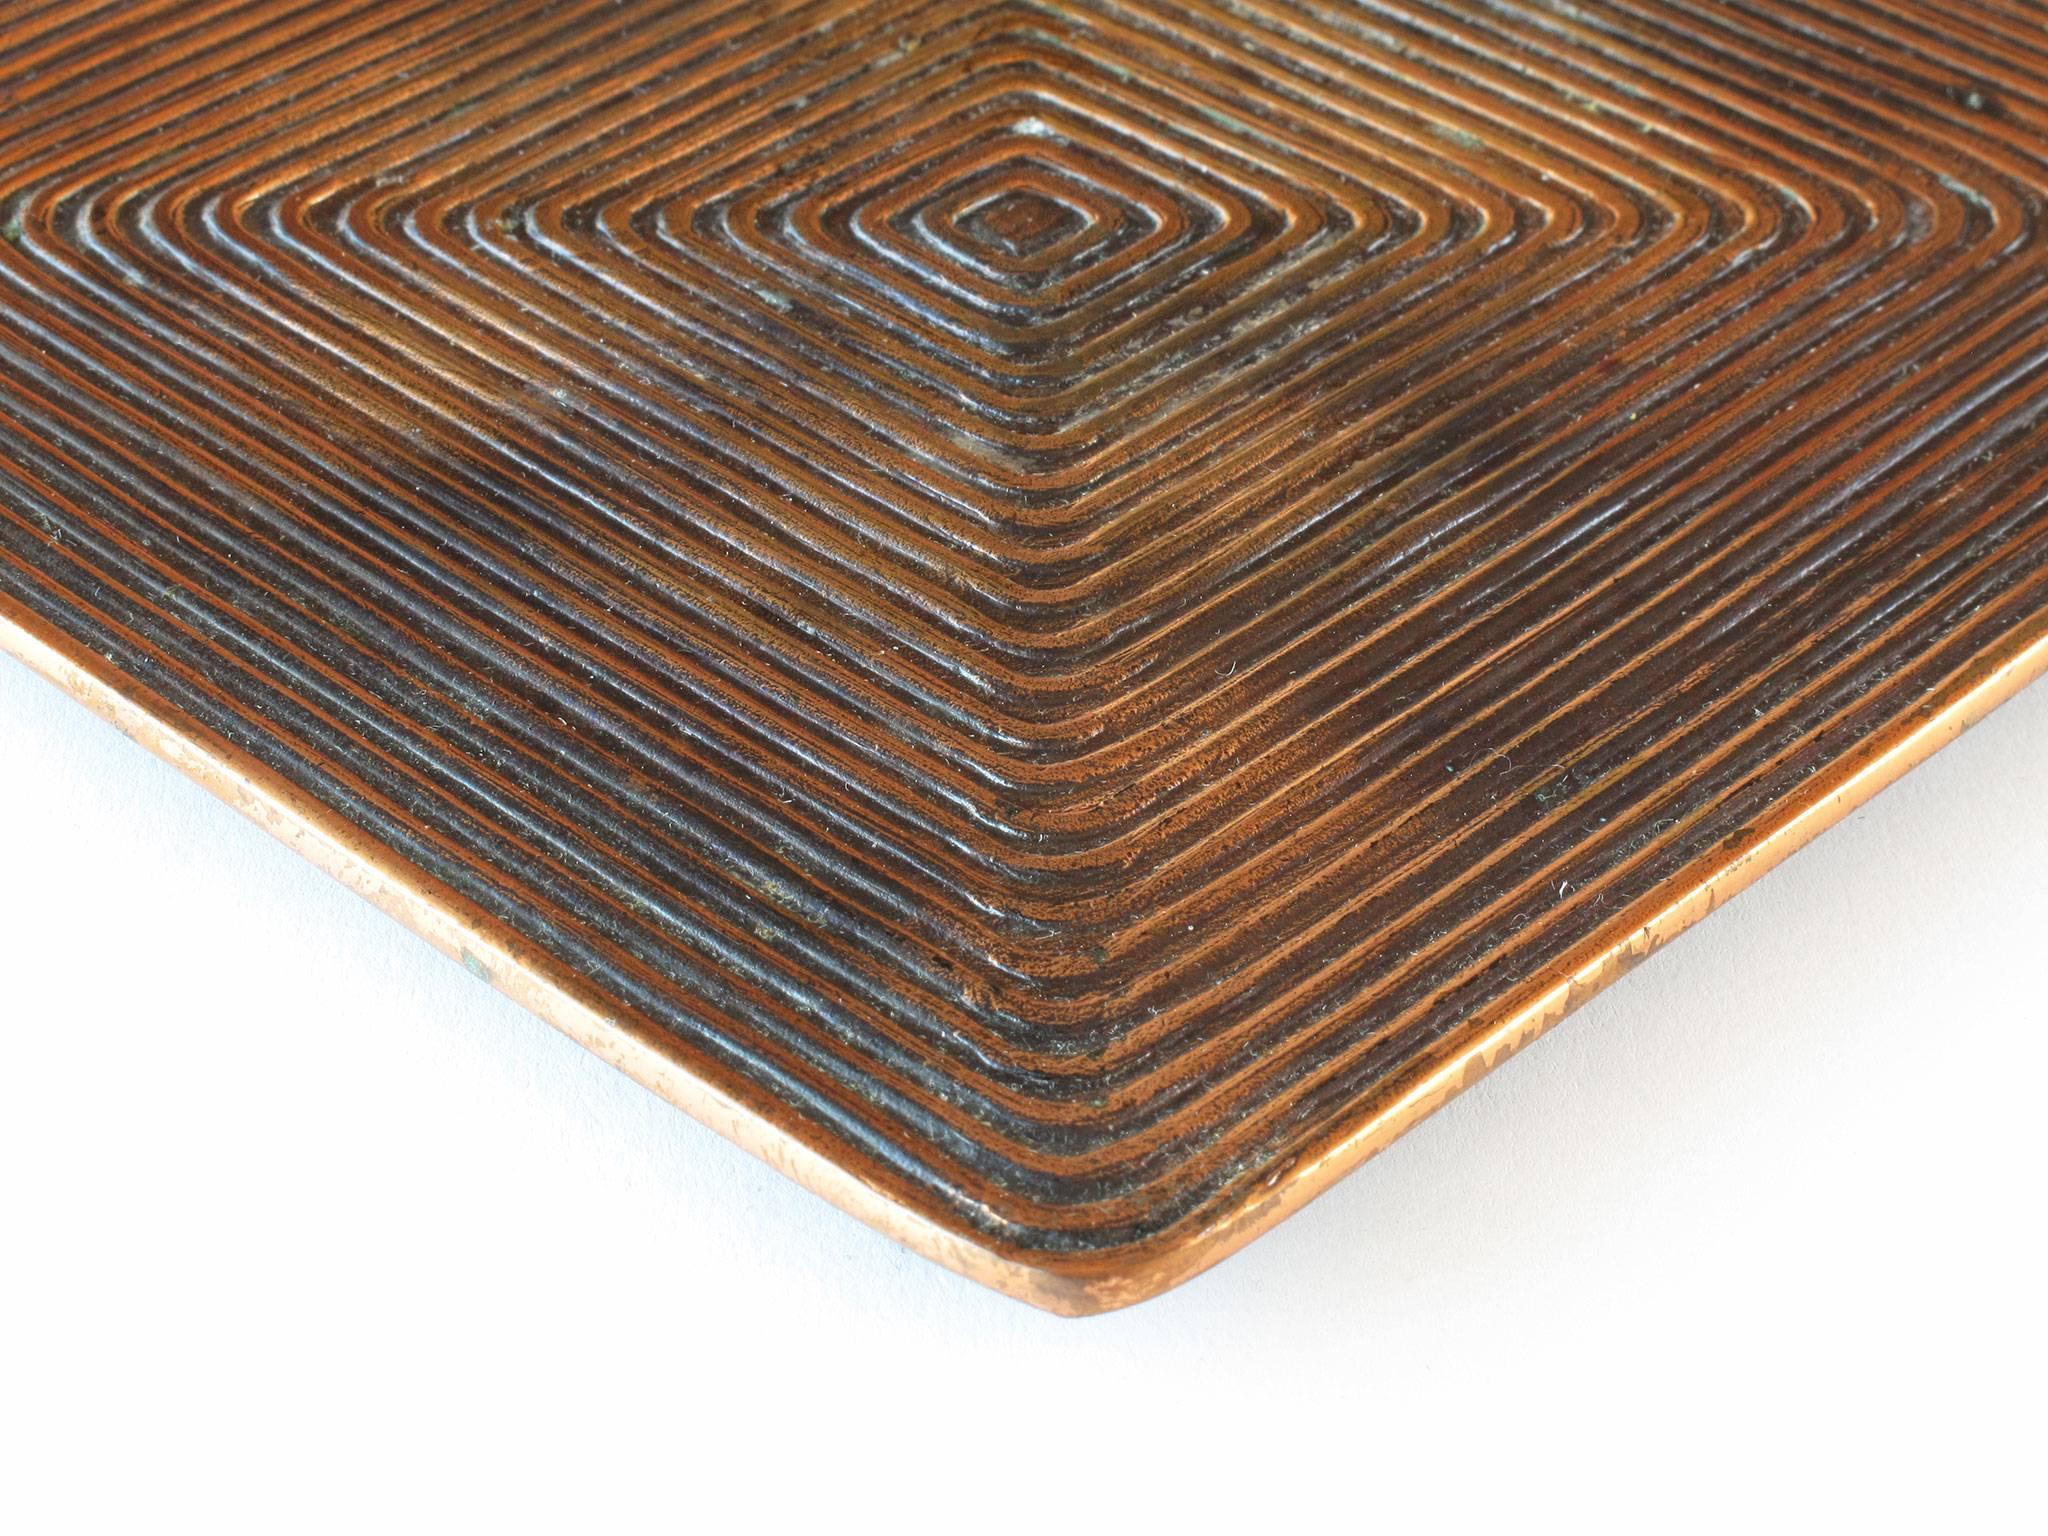 Ben Seibel tray or trivet, copper plated metal, 1950s, Jenfred Ware, New York, 1/2 high x 6 7/8 wide x 6 7/8 deep inches.